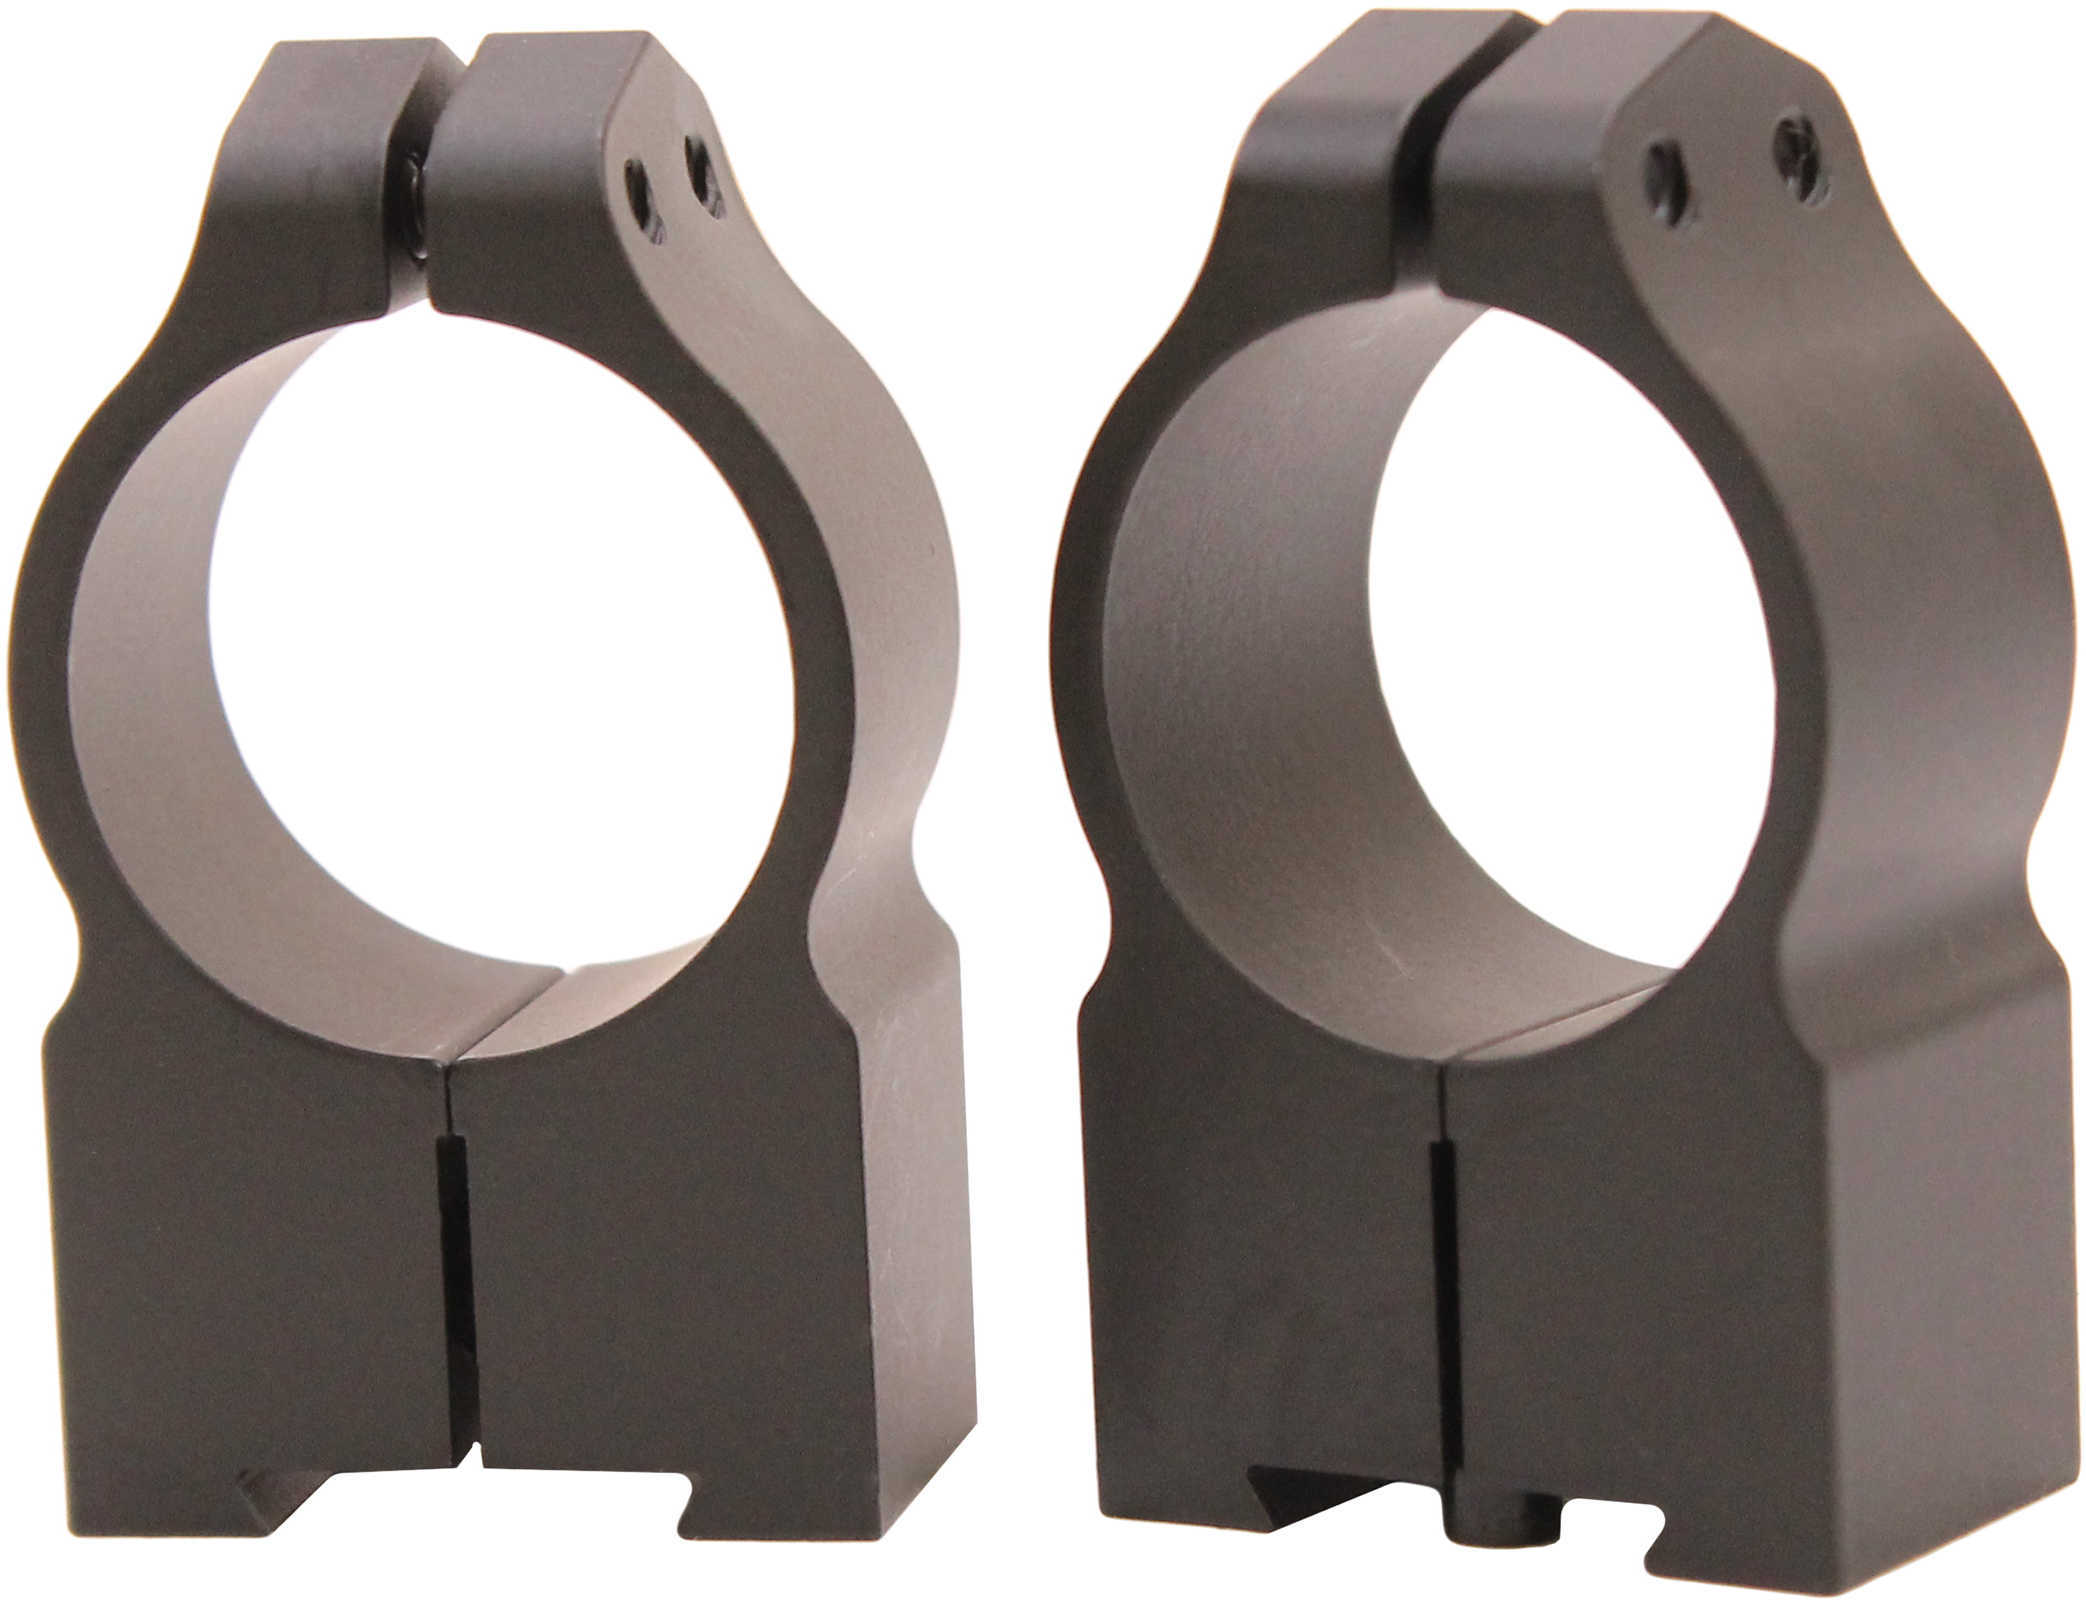 Warne 1" High Scope Rings With Matte Black Finish Md: 2Tm